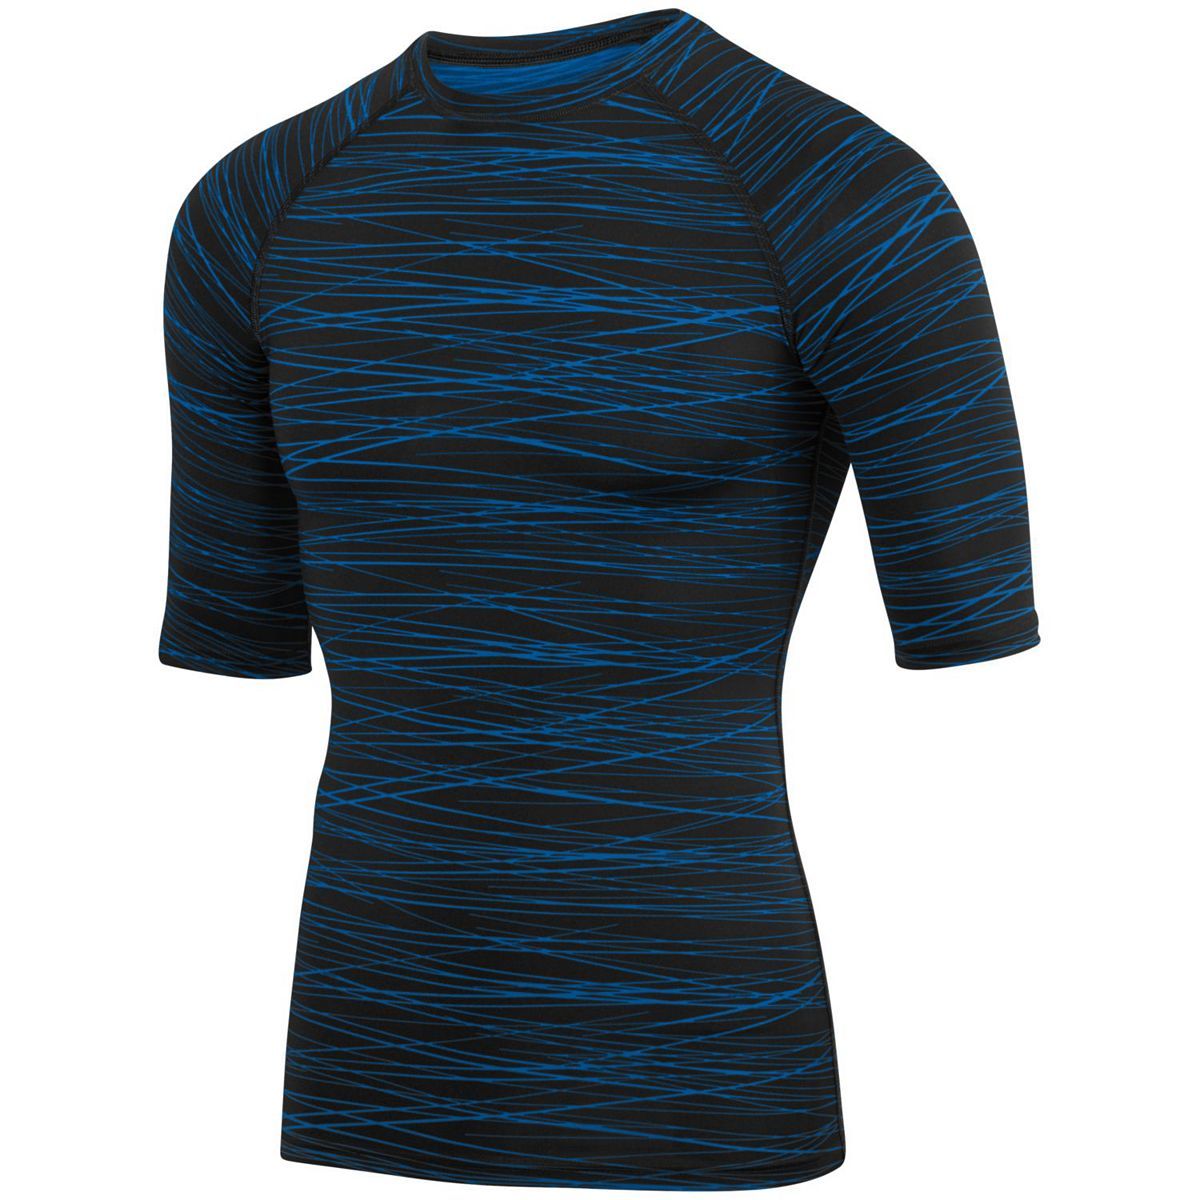 Augusta Sportswear Hyperform Compression Half Sleeve Tee in Black/Royal Print  -Part of the Adult, Adult-Tee-Shirt, T-Shirts, Augusta-Products, Shirts product lines at KanaleyCreations.com